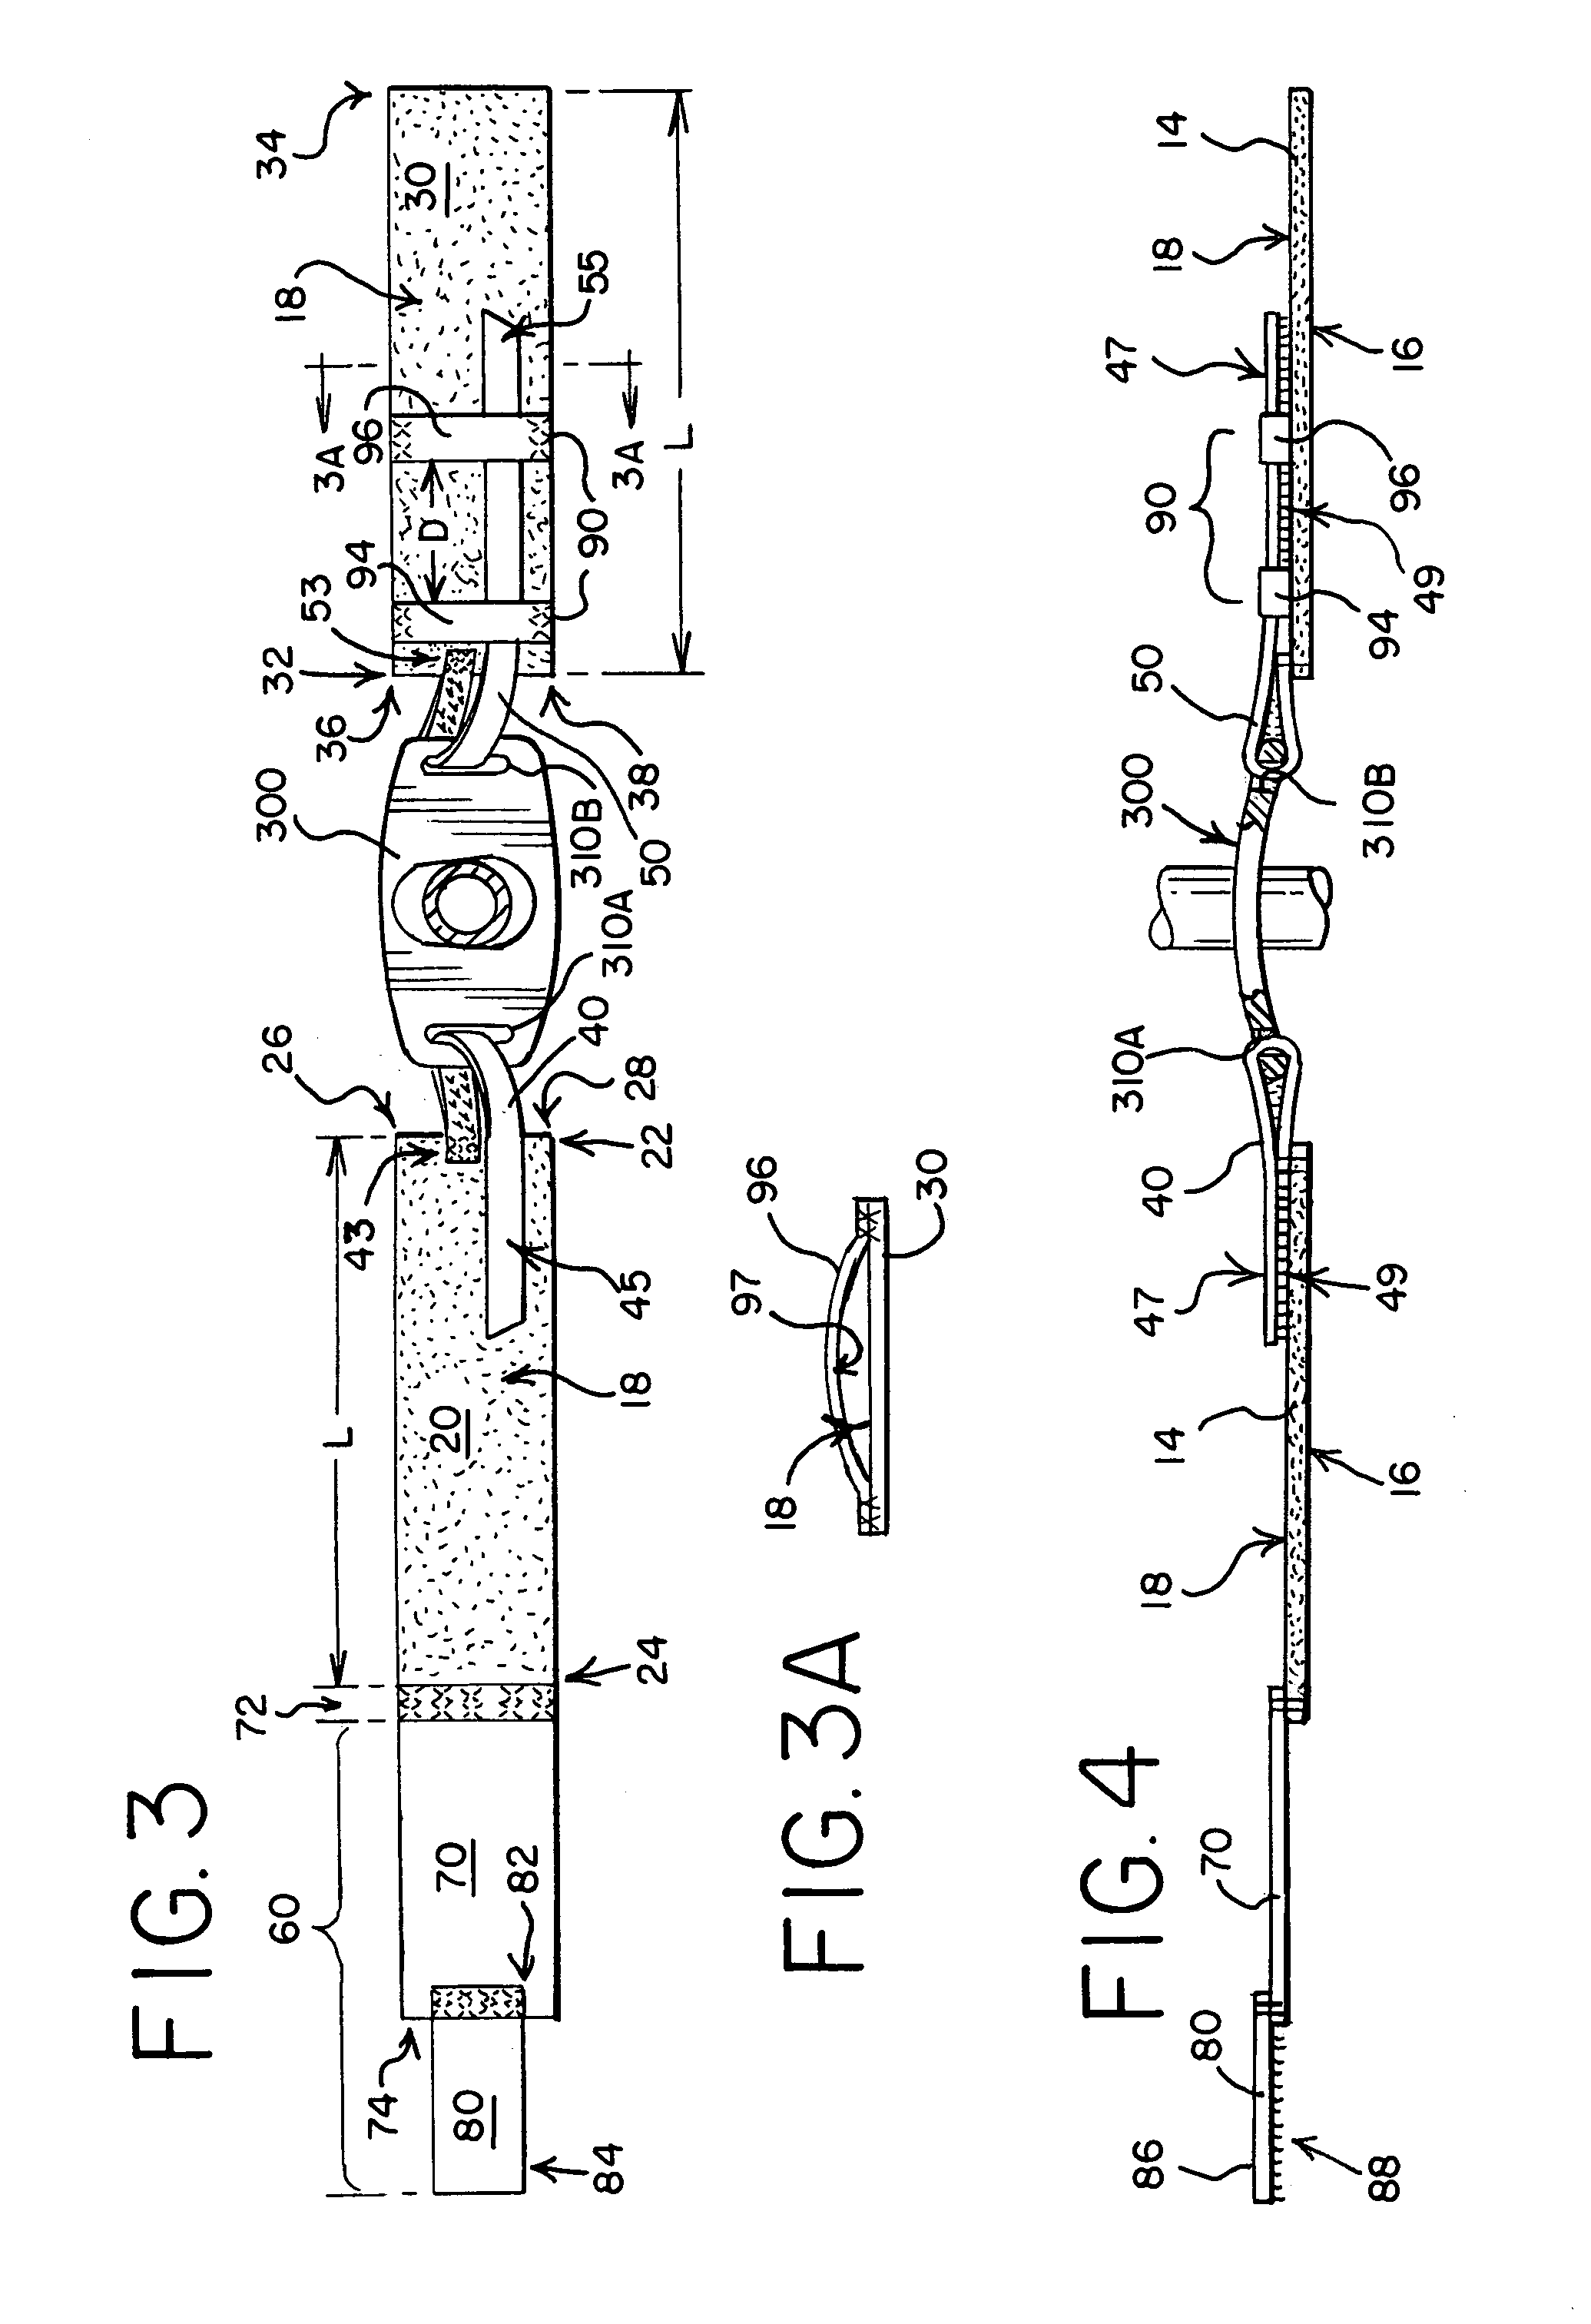 Tracheal tube anti-disconnect device